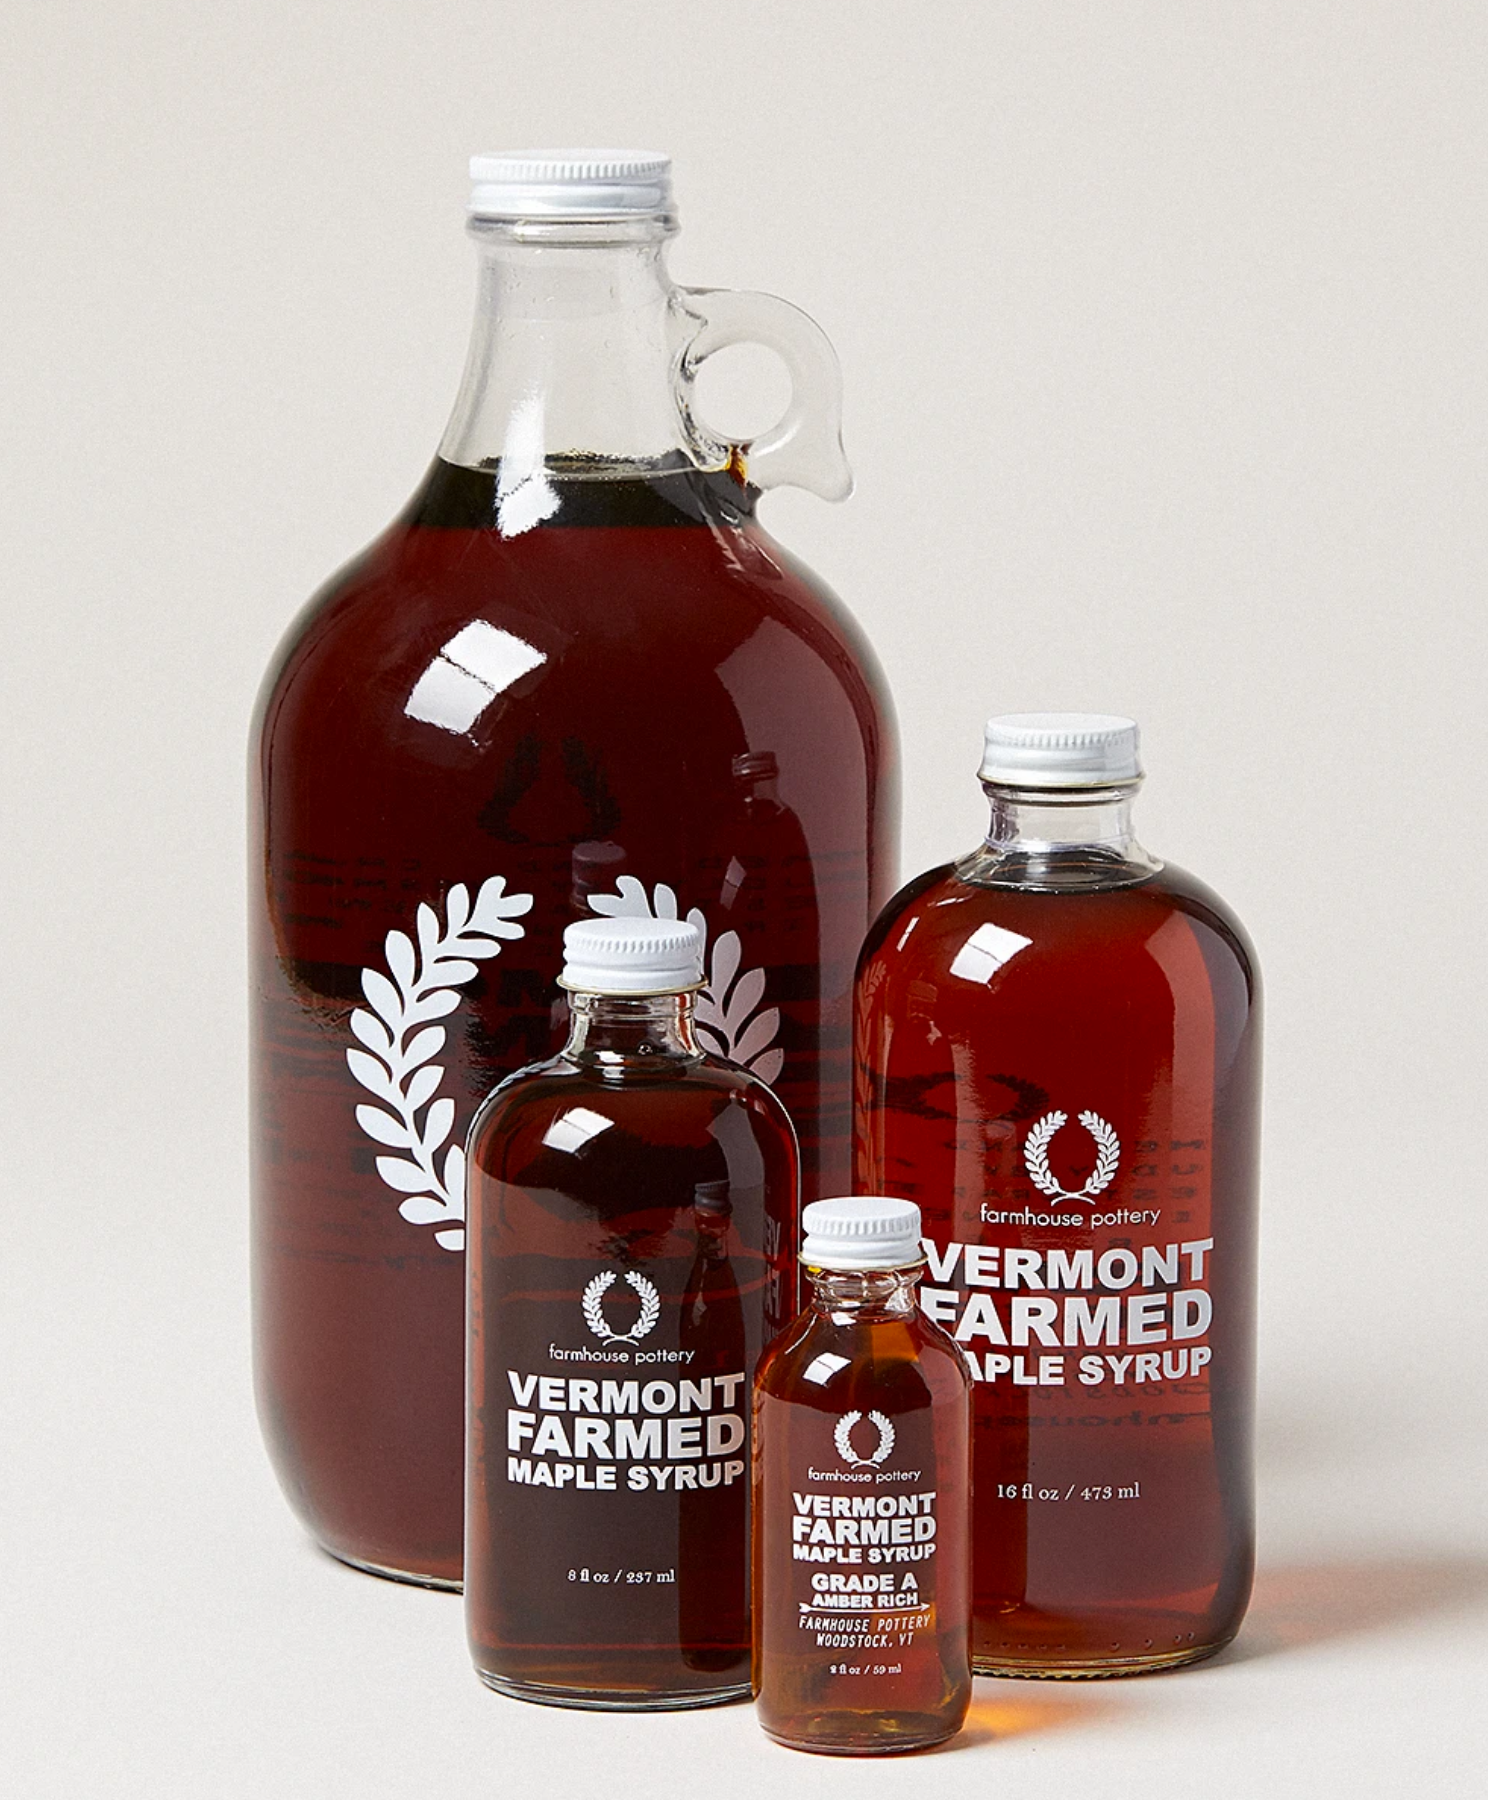 Vermont Farmed Maple Syrup 2oz or 8oz